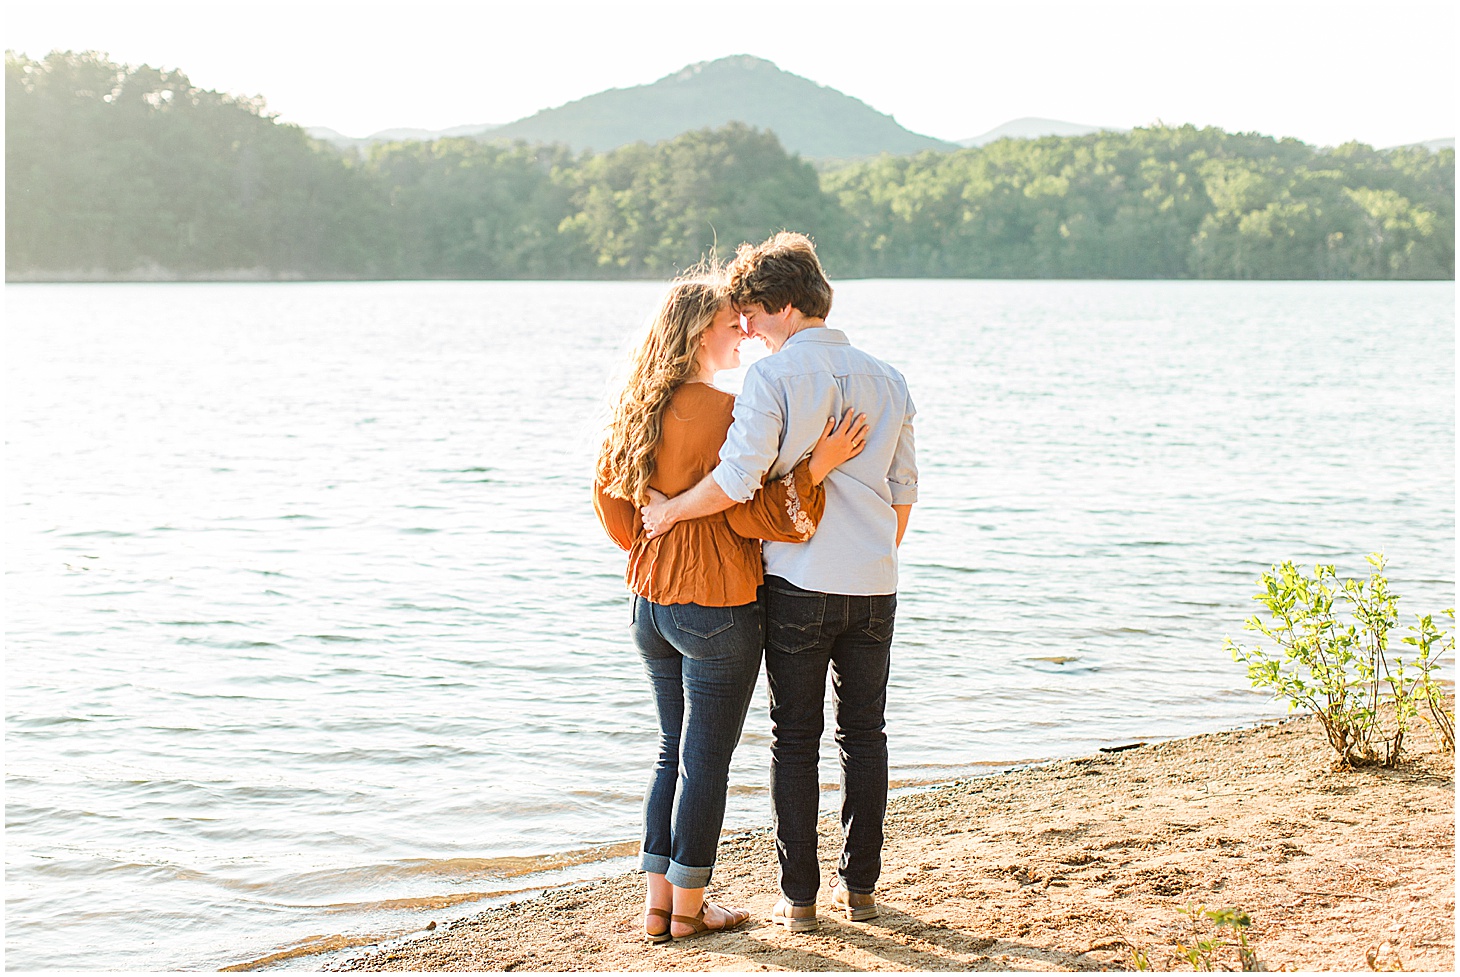 carvinscoveengagementsession_roanokeengagementsession_carvinscove_virginiawedding_virginiaweddingphotographer_vaweddingphotographer_photo_0020.jpg